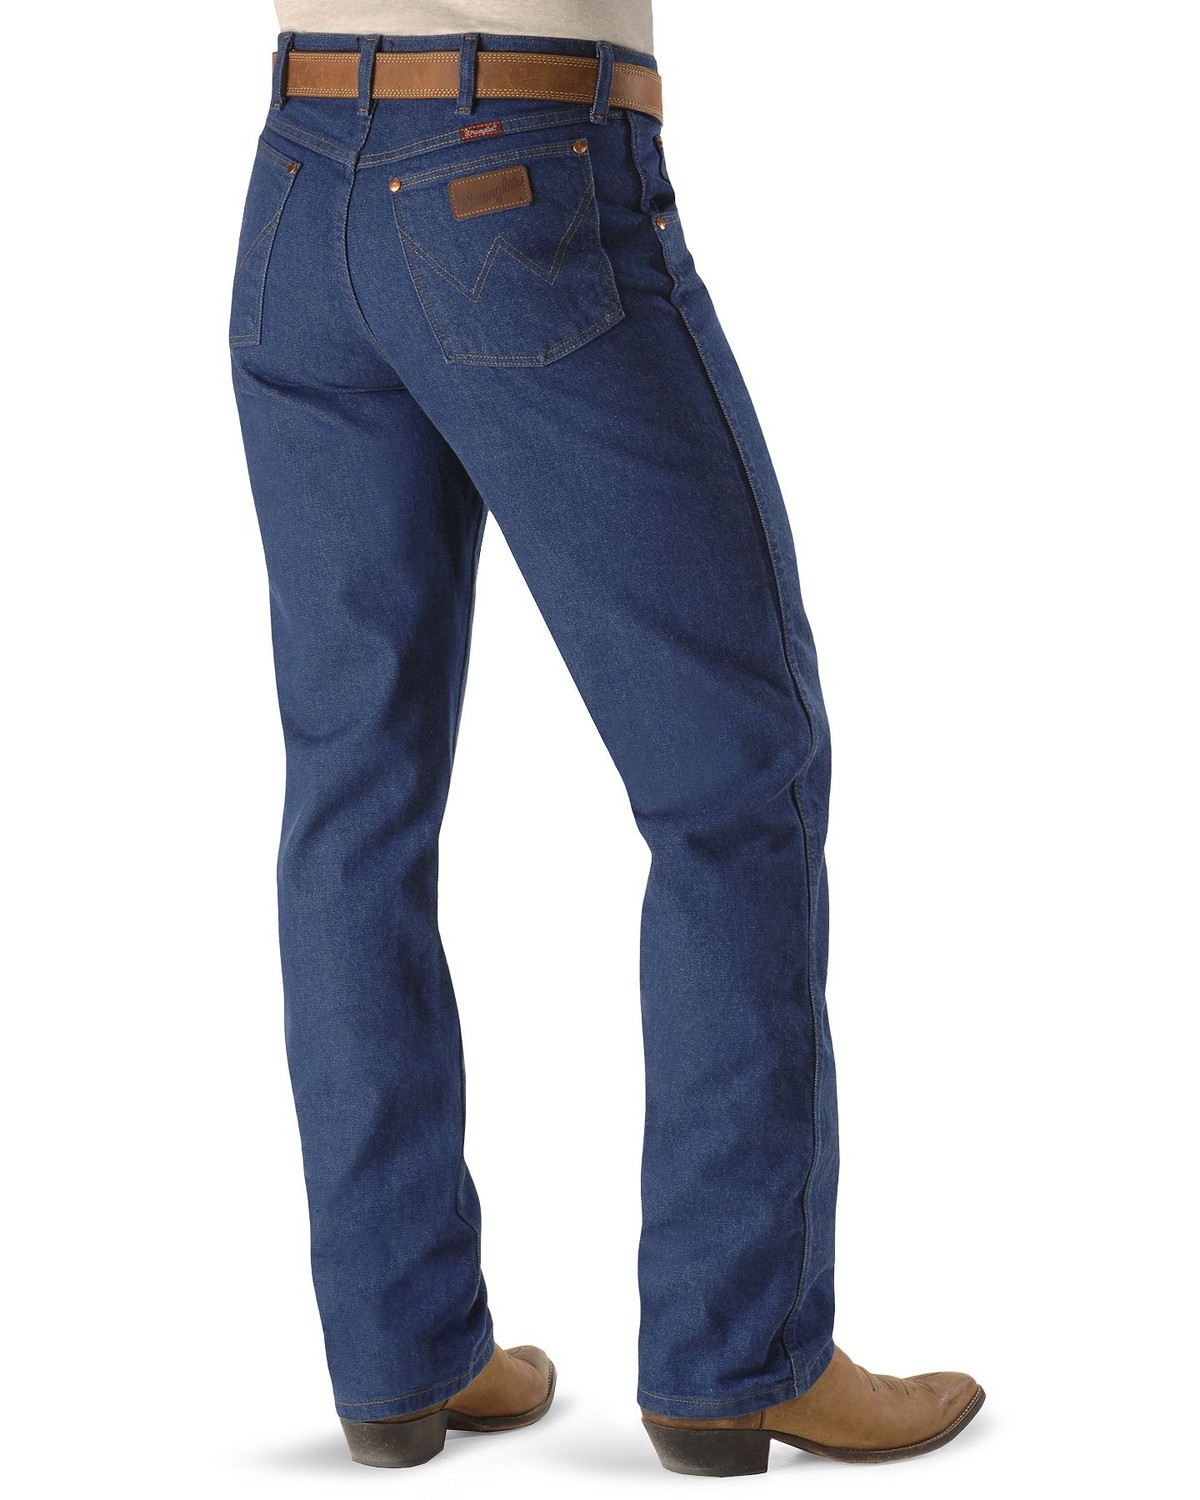 wrangler relaxed fit jeans big and tall